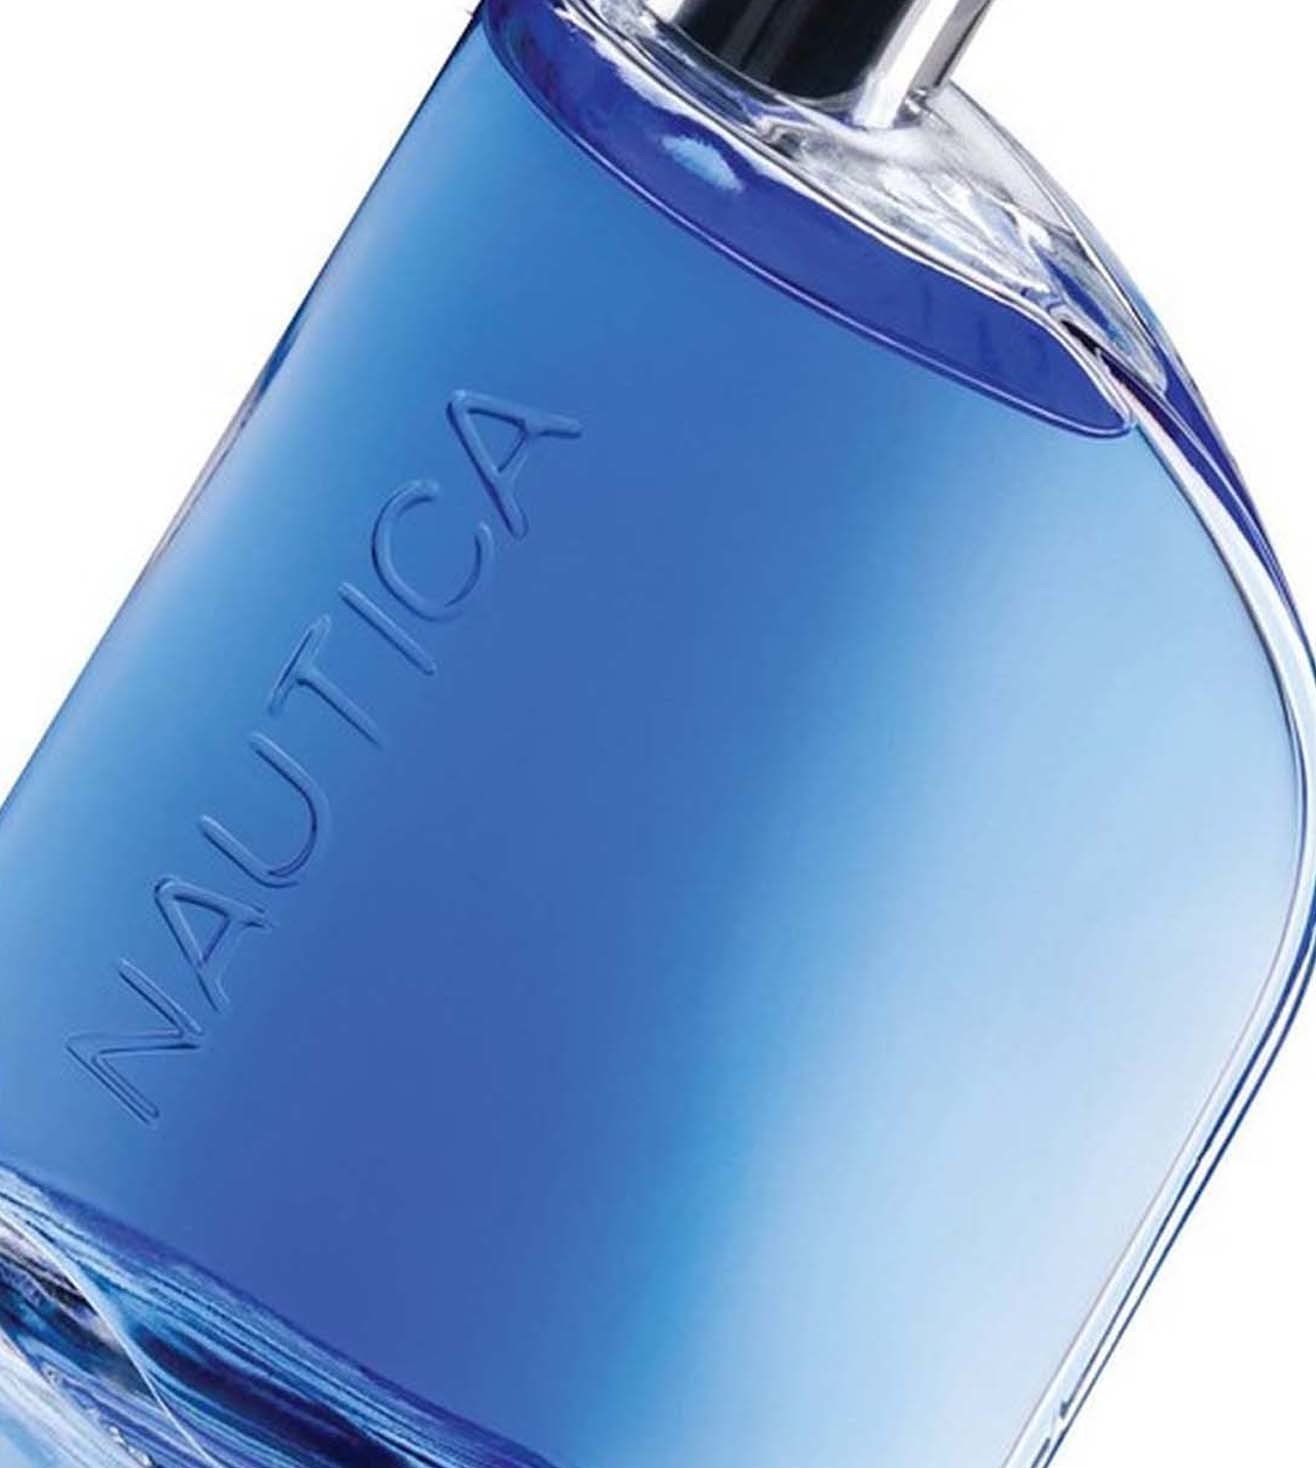  Nautica Blue Eau De Toilette for Men - Invigorating, Fresh  Scent - Woody, Fruity Notes of Pineapple, Water Lily, and Sandalwood -  Everyday Cologne - 3.4 Fl Oz